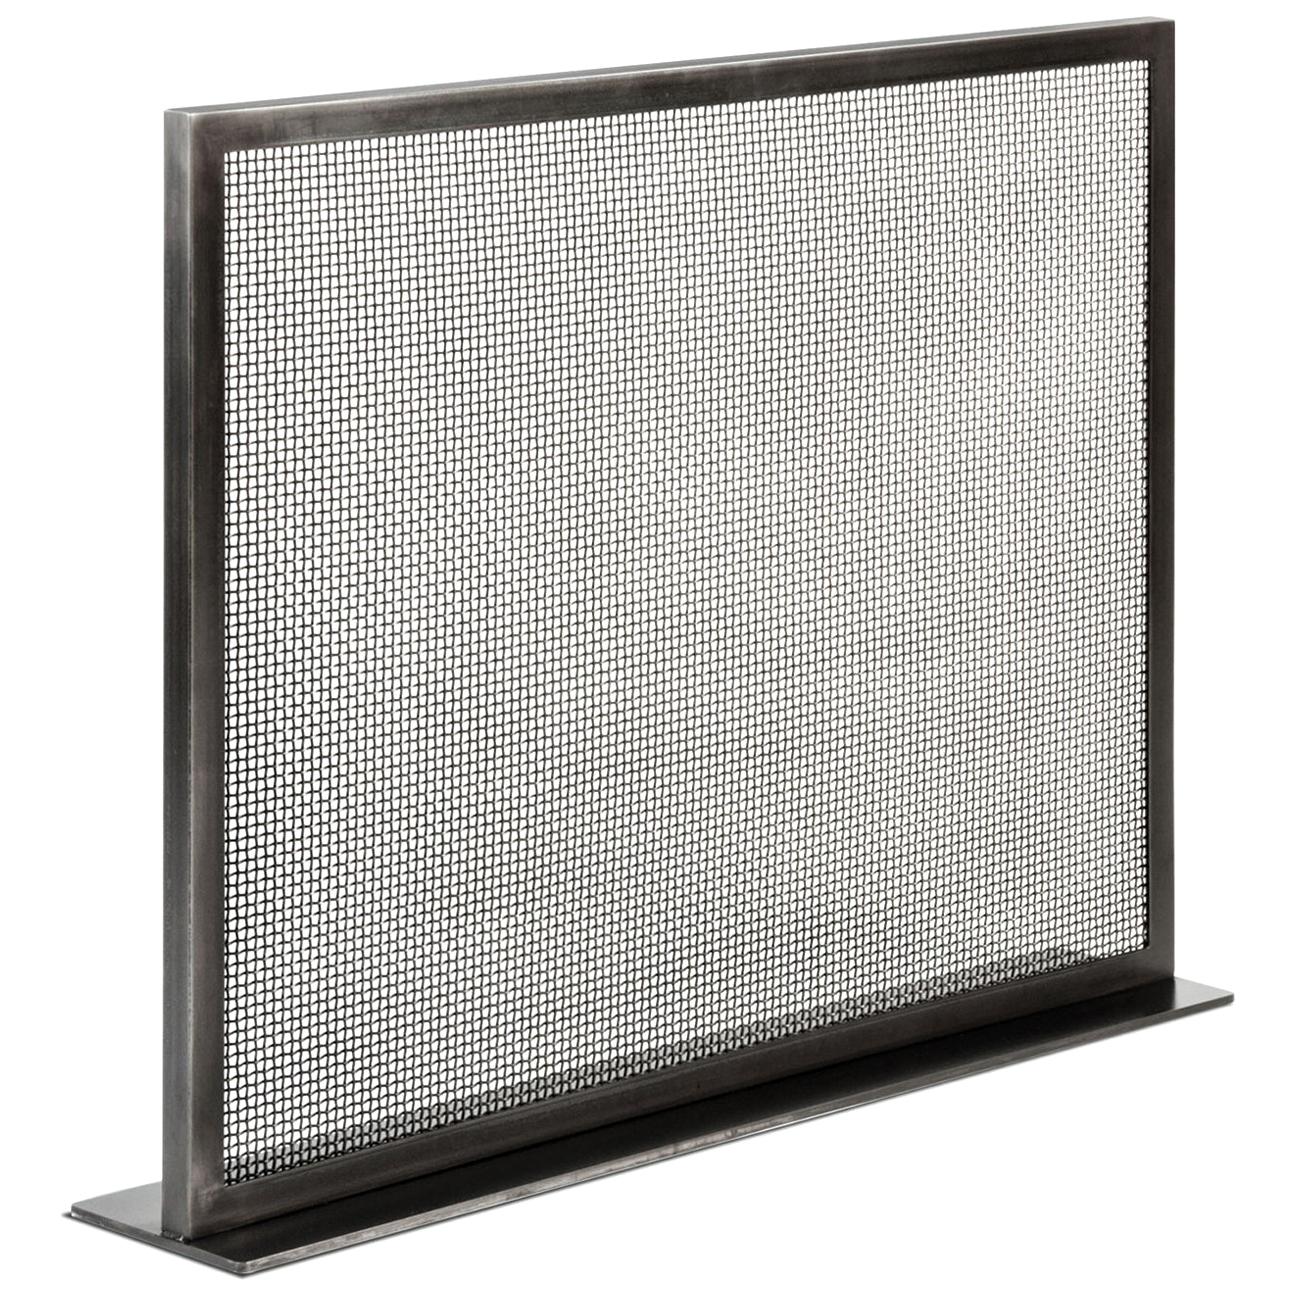 Fireplace Screen in Metal with a Blackened Steel Finish Customizable 